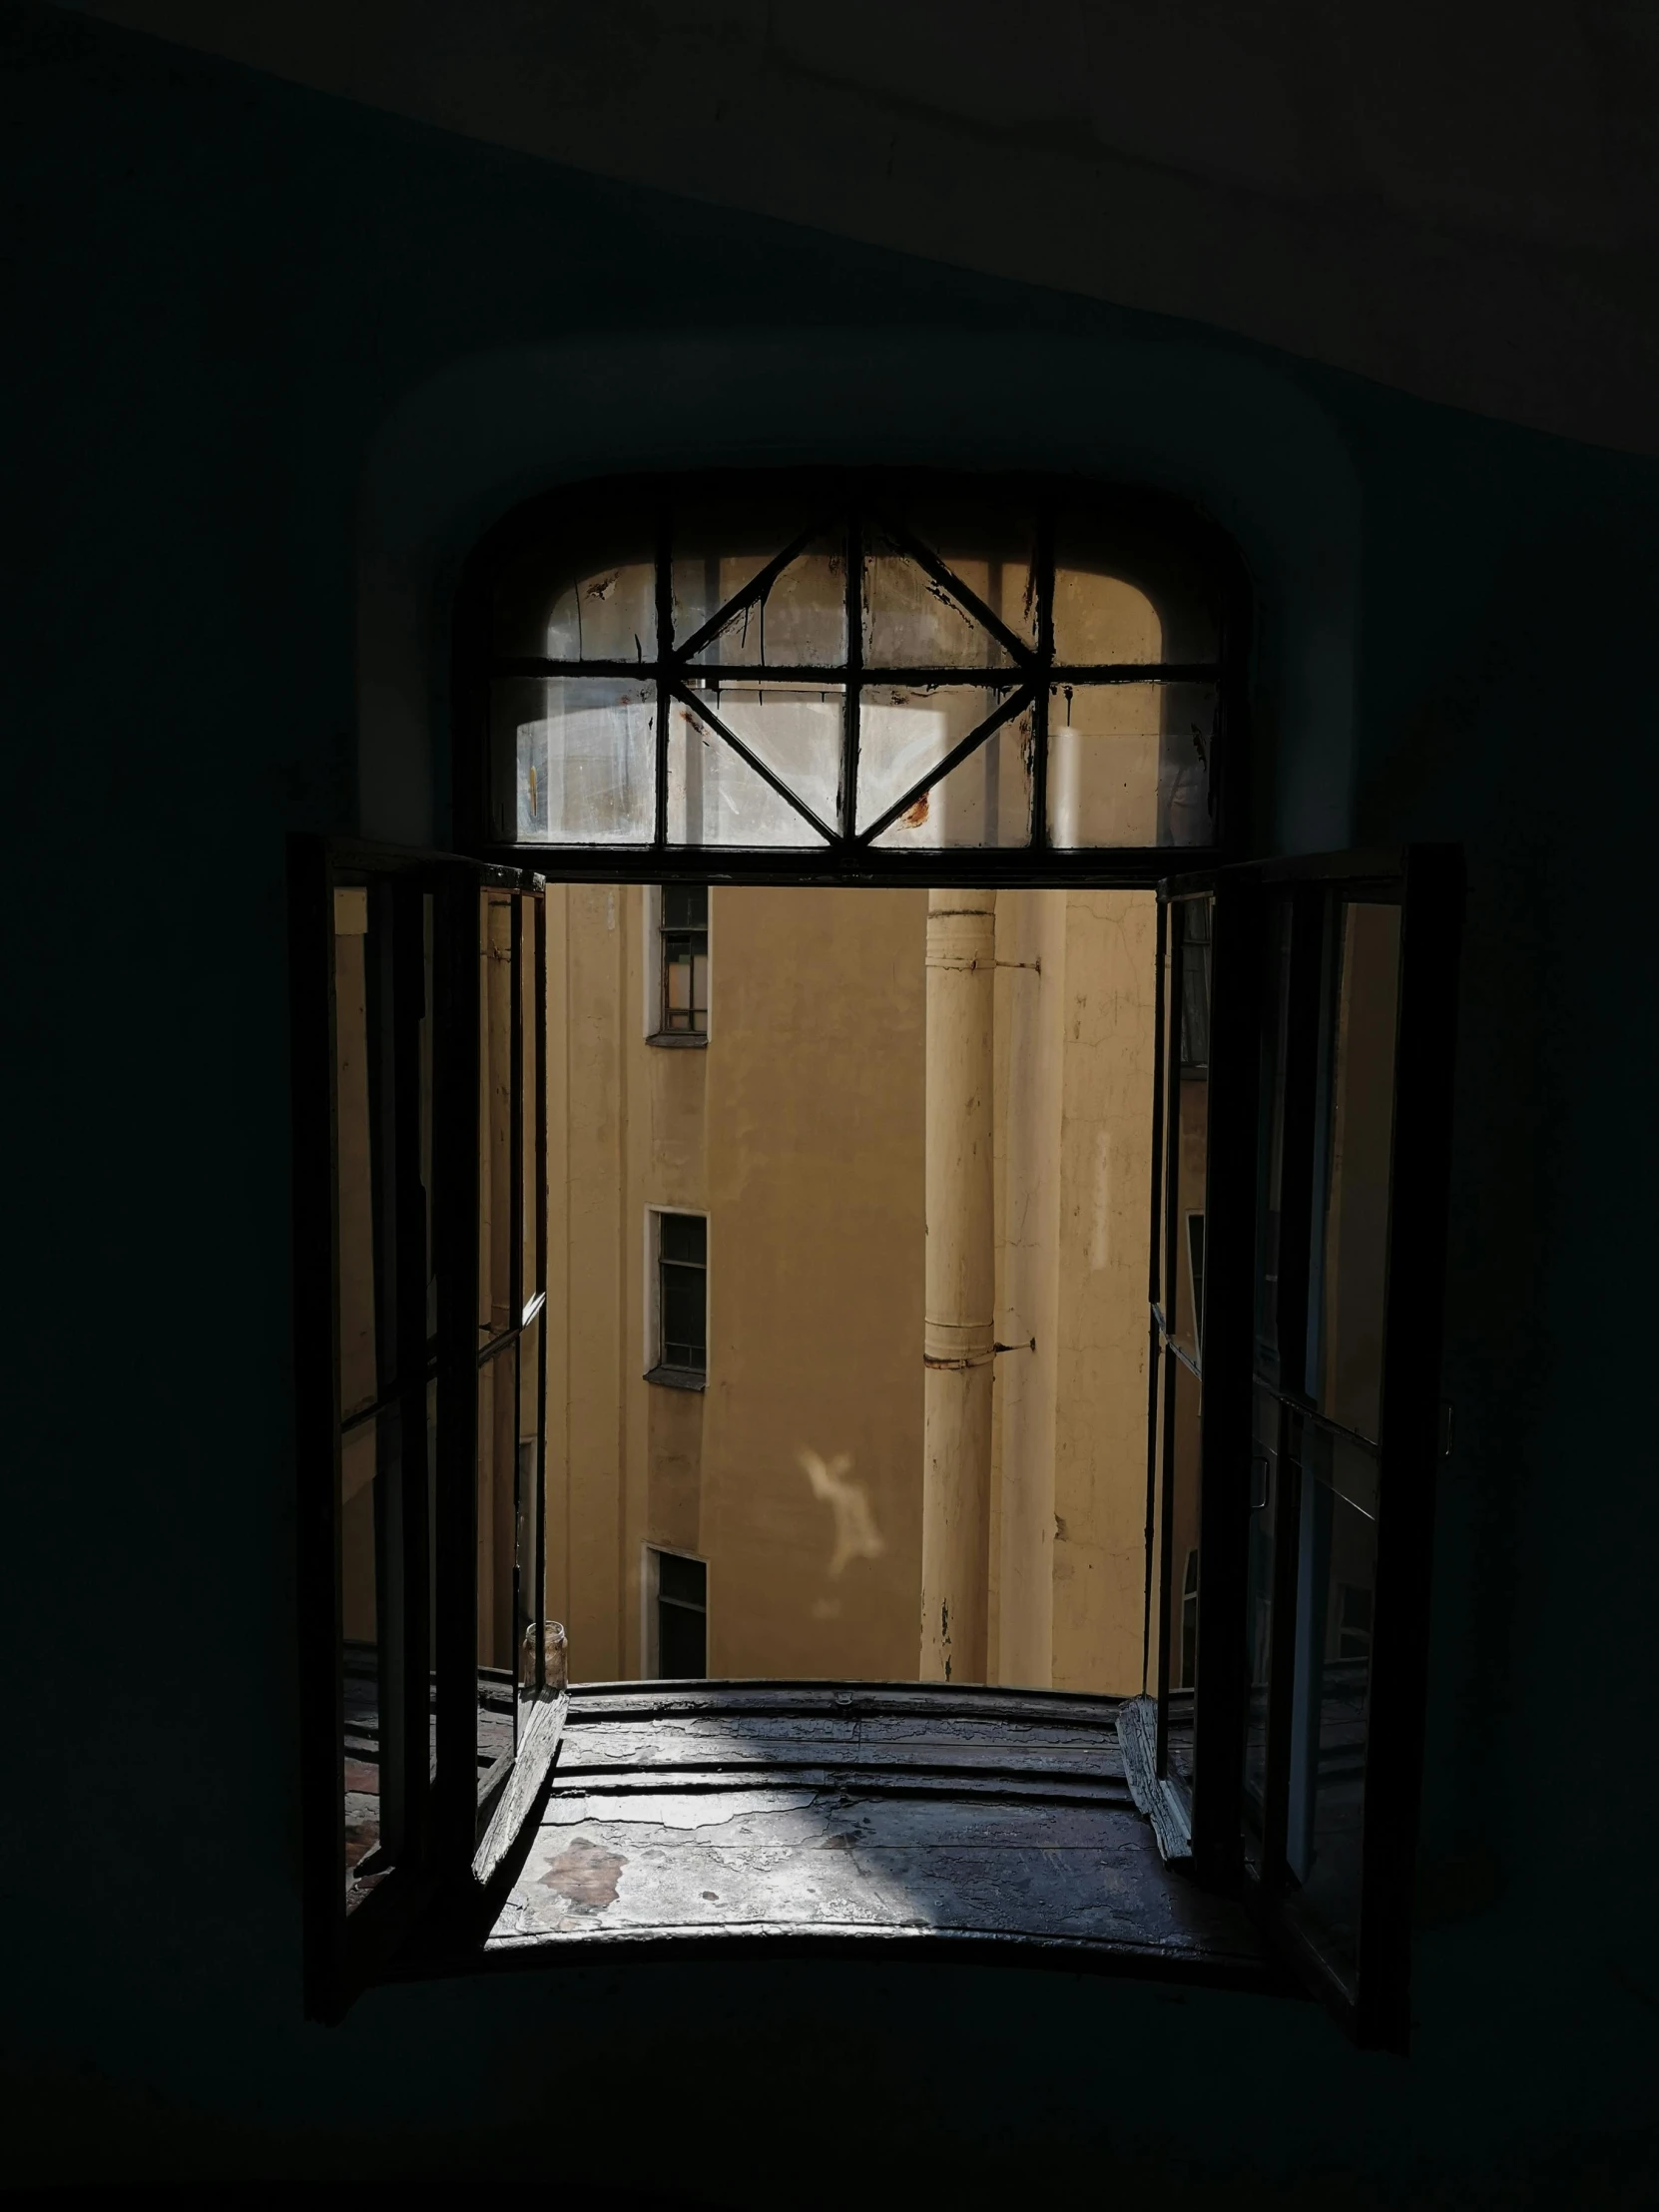 the shadow of an arch through the door shows a building